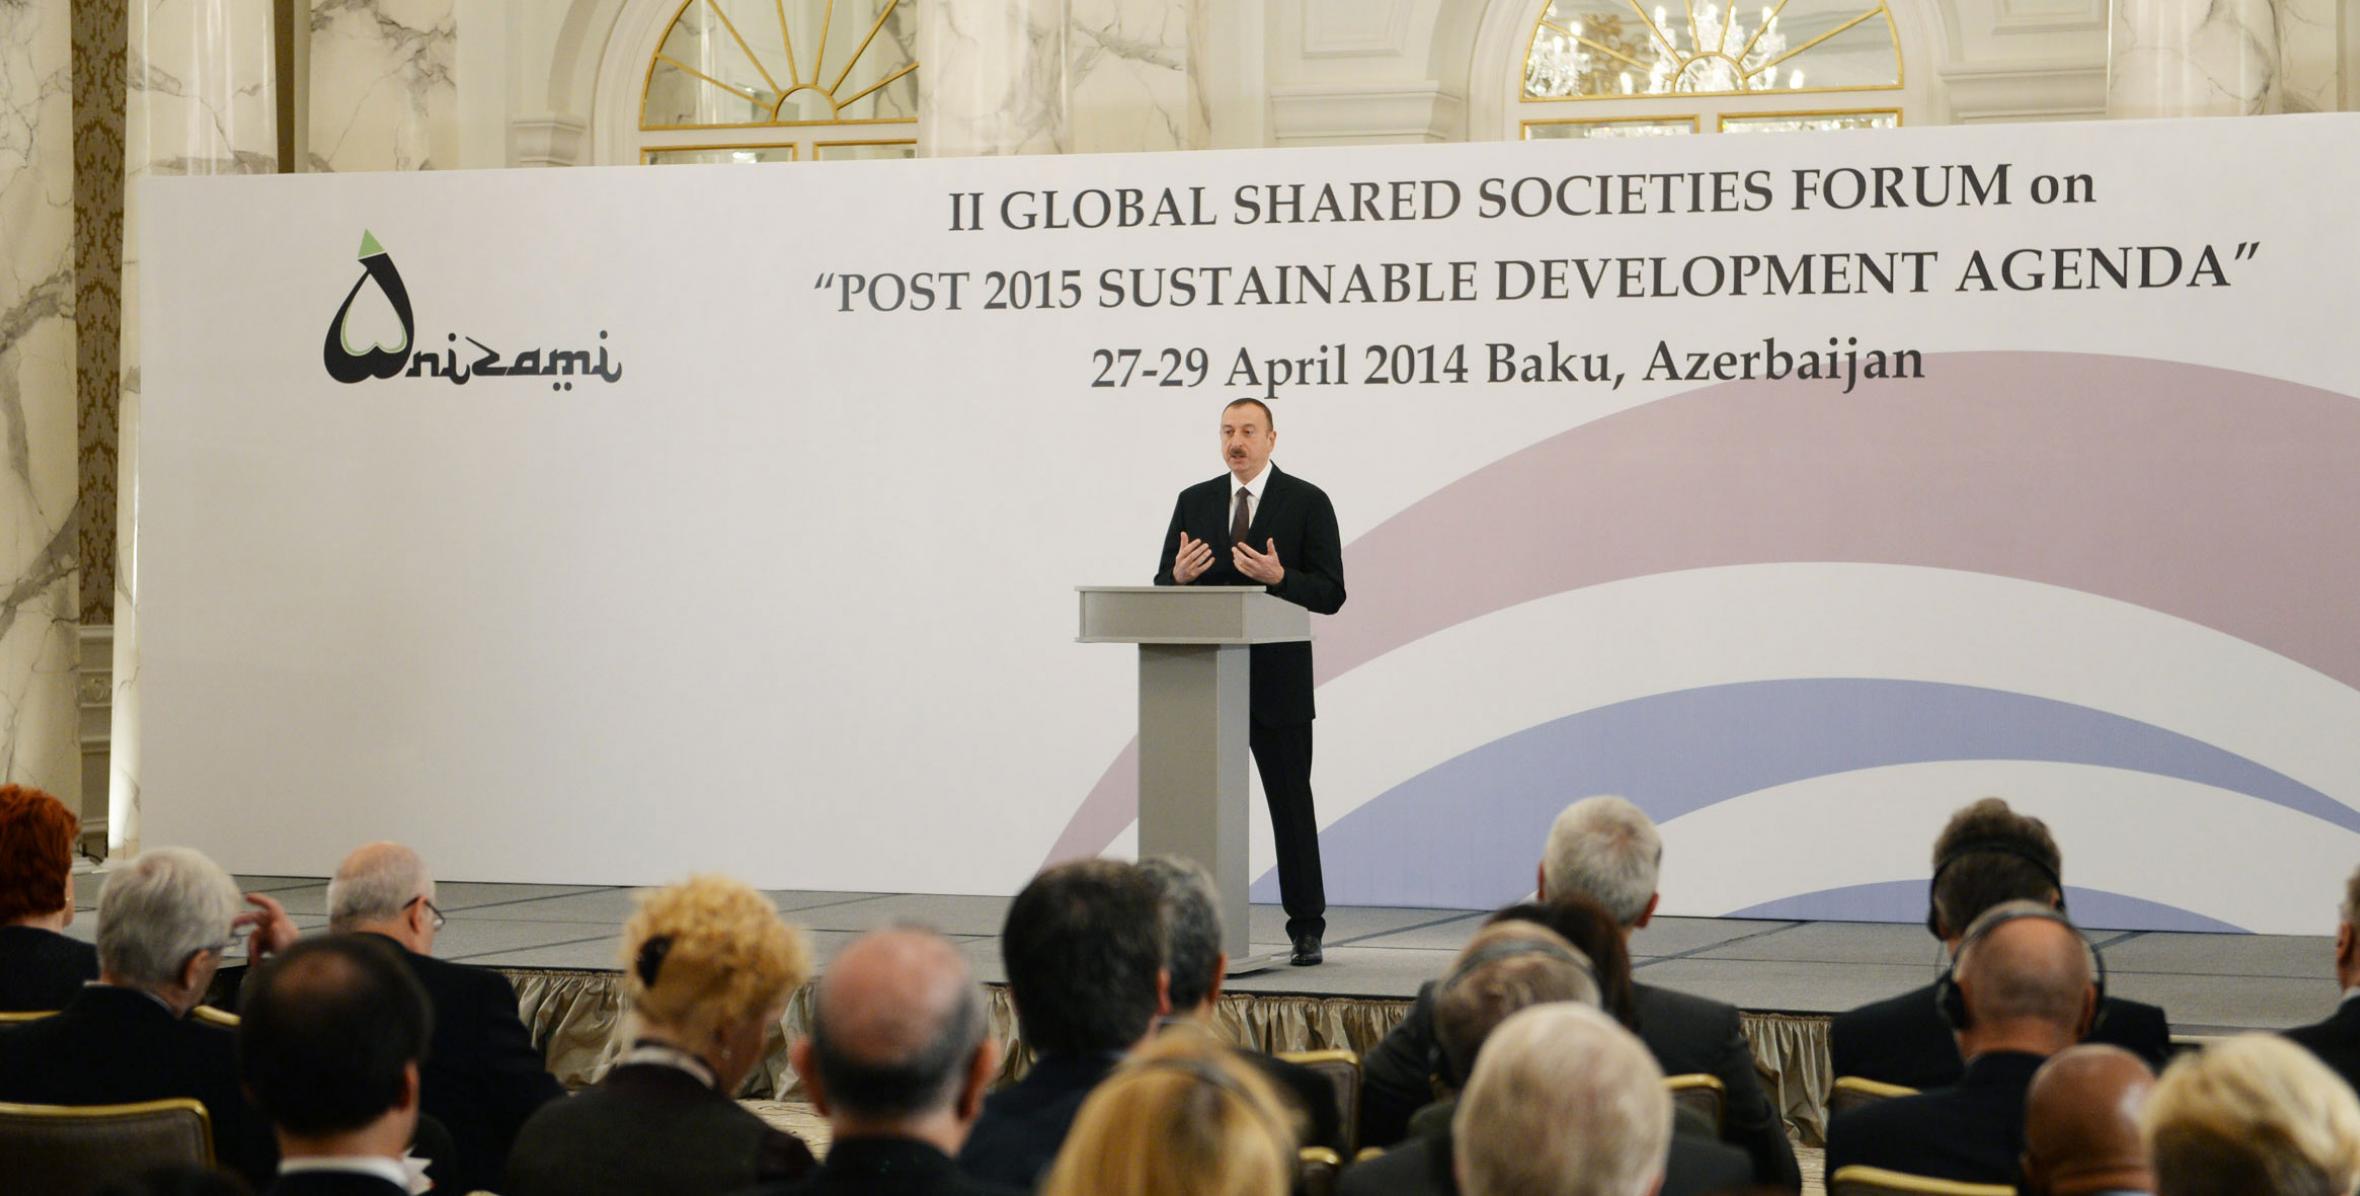 Speech by Ilham Aliyev at the opening ceremony of the 2nd Global Shared Societies Forum in Baku